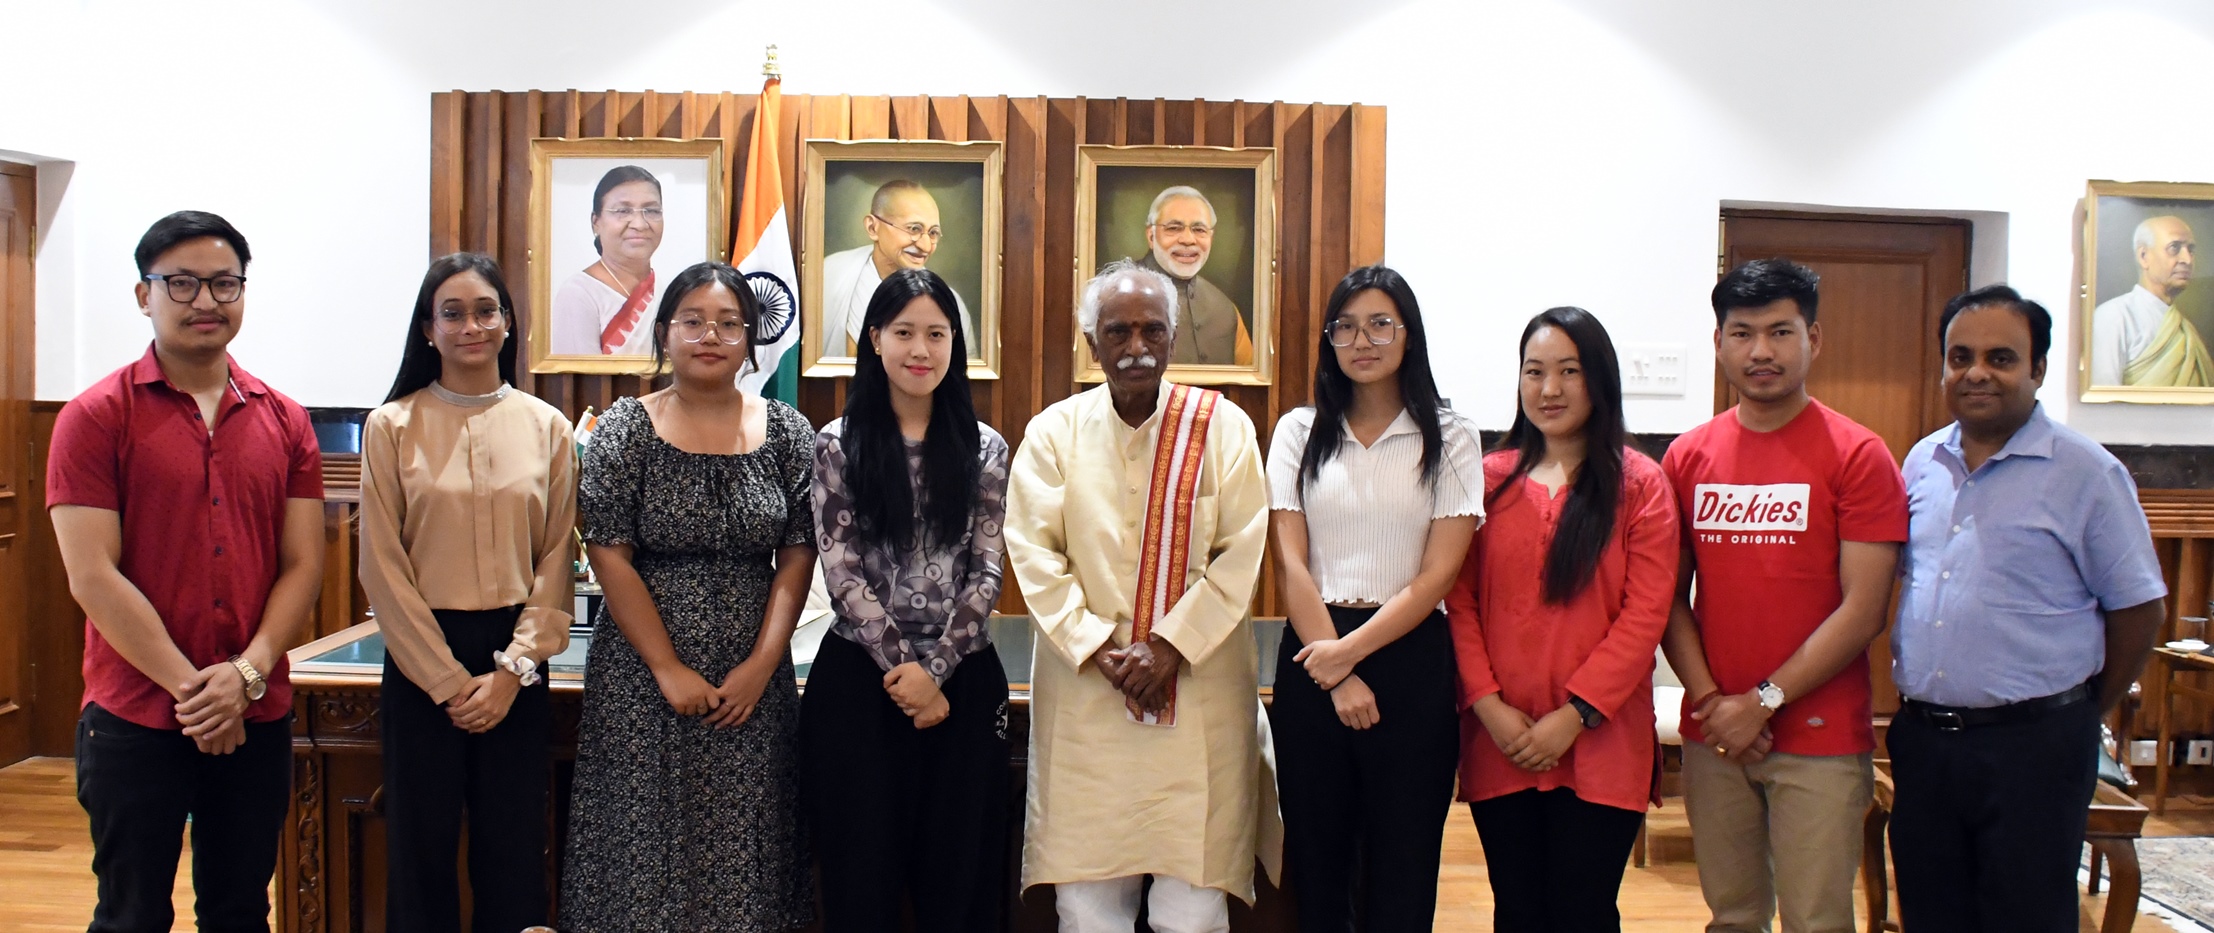 Governor Shri Bandaru Dattatraya in a group photograph with the delegation of students on the occasion of Sikkim Foundation Day at Raj Bhavan Haryana on Tuesday evening. Secretary to the Governor, Shri Atul Dwivedi, IAS, Secretary to Hon'ble Governor is also seen in the photograph